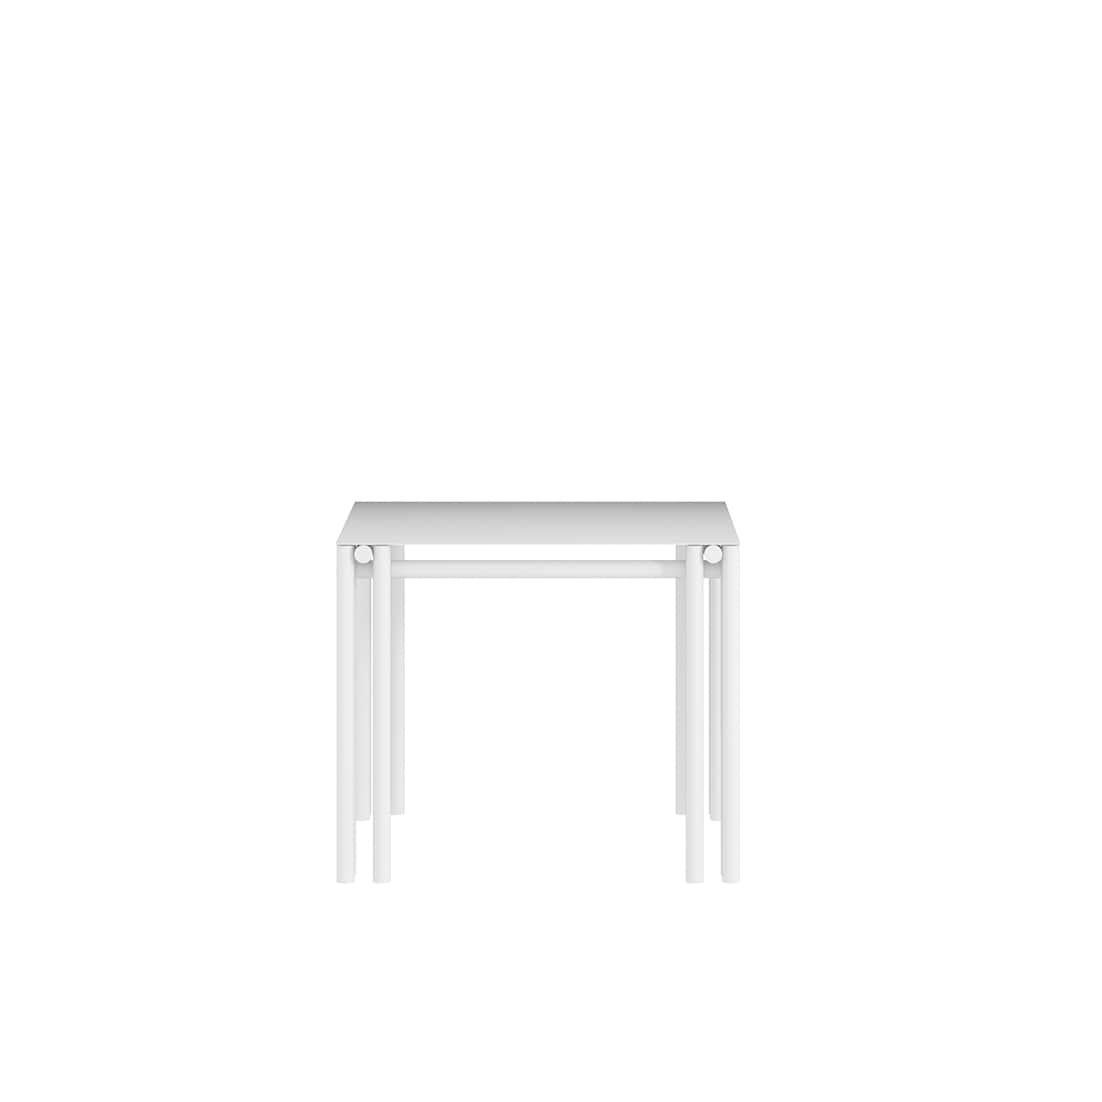 The Dolmen Square Dining Table is a tubular piece conceptualized as a dining table suitable for both, indoor and outdoor. 
Crafted by hand in galvanized aluminum and coated with a matte electrostatic finish its size can be customized.
With a table